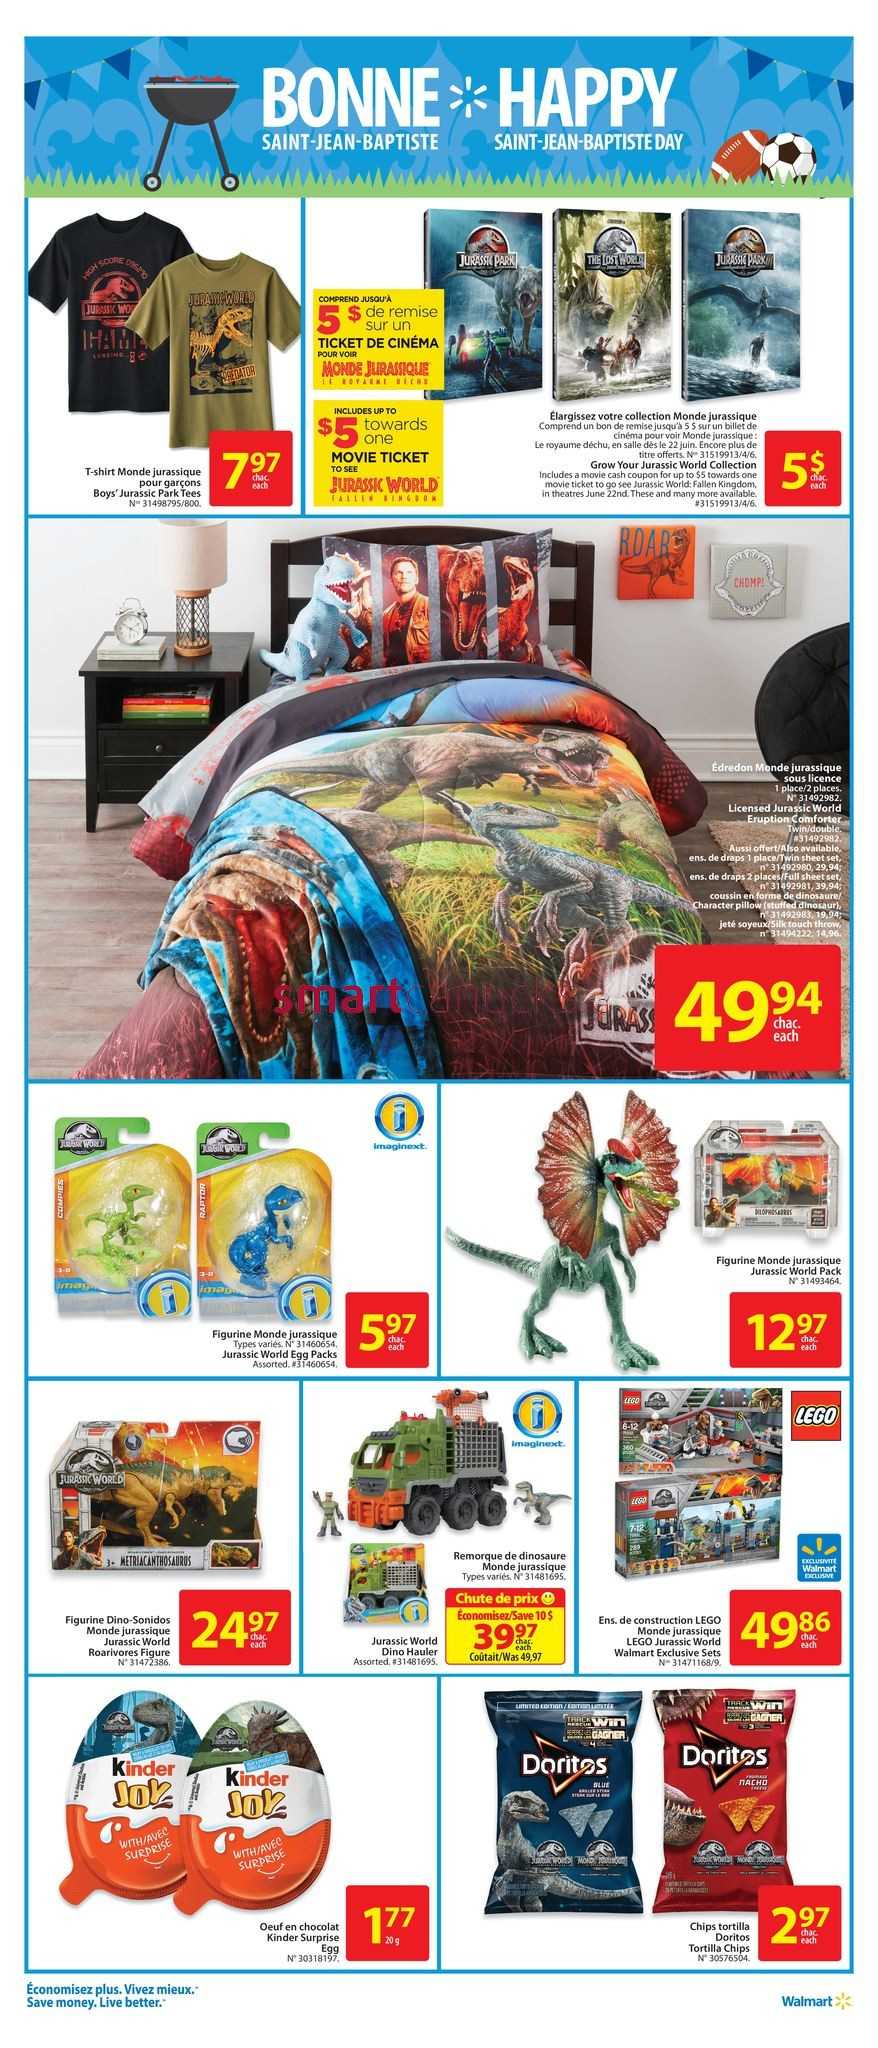 June 2018 Walmart Canada Flyers Coupons Sales Page 2